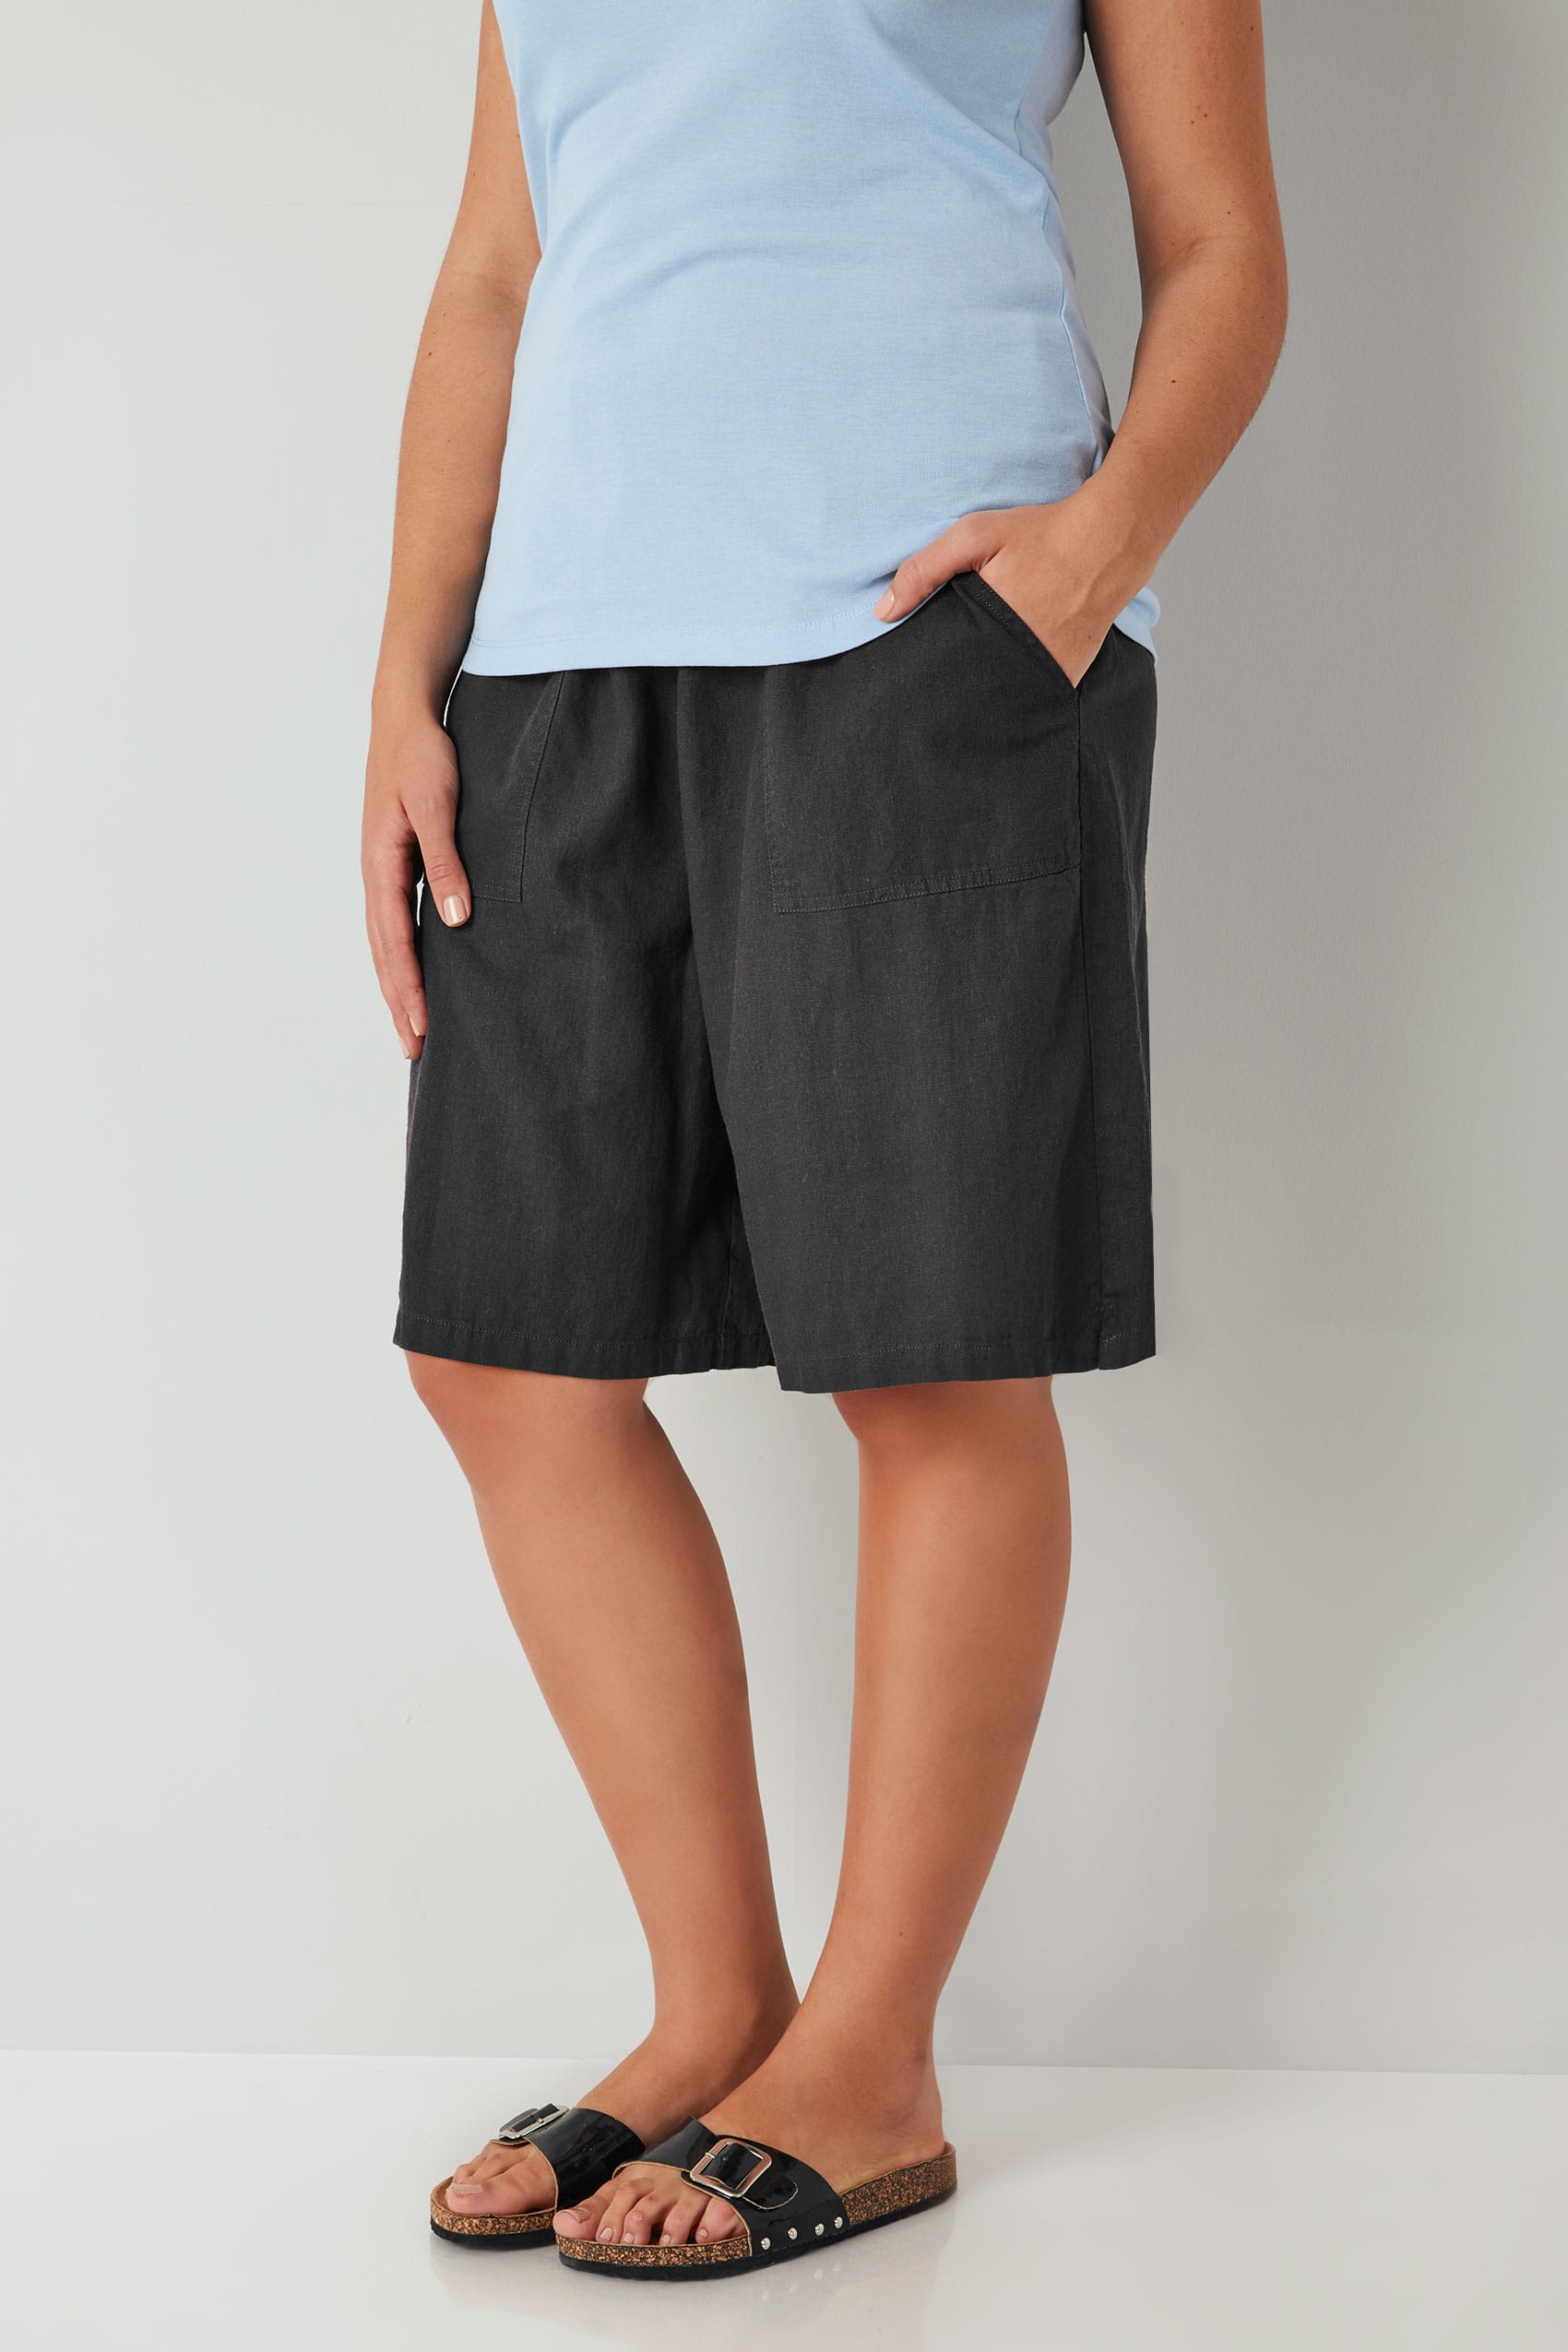 Dark Grey Linen Mix Pull On Shorts With Pockets Plus Sixe 16 To 36